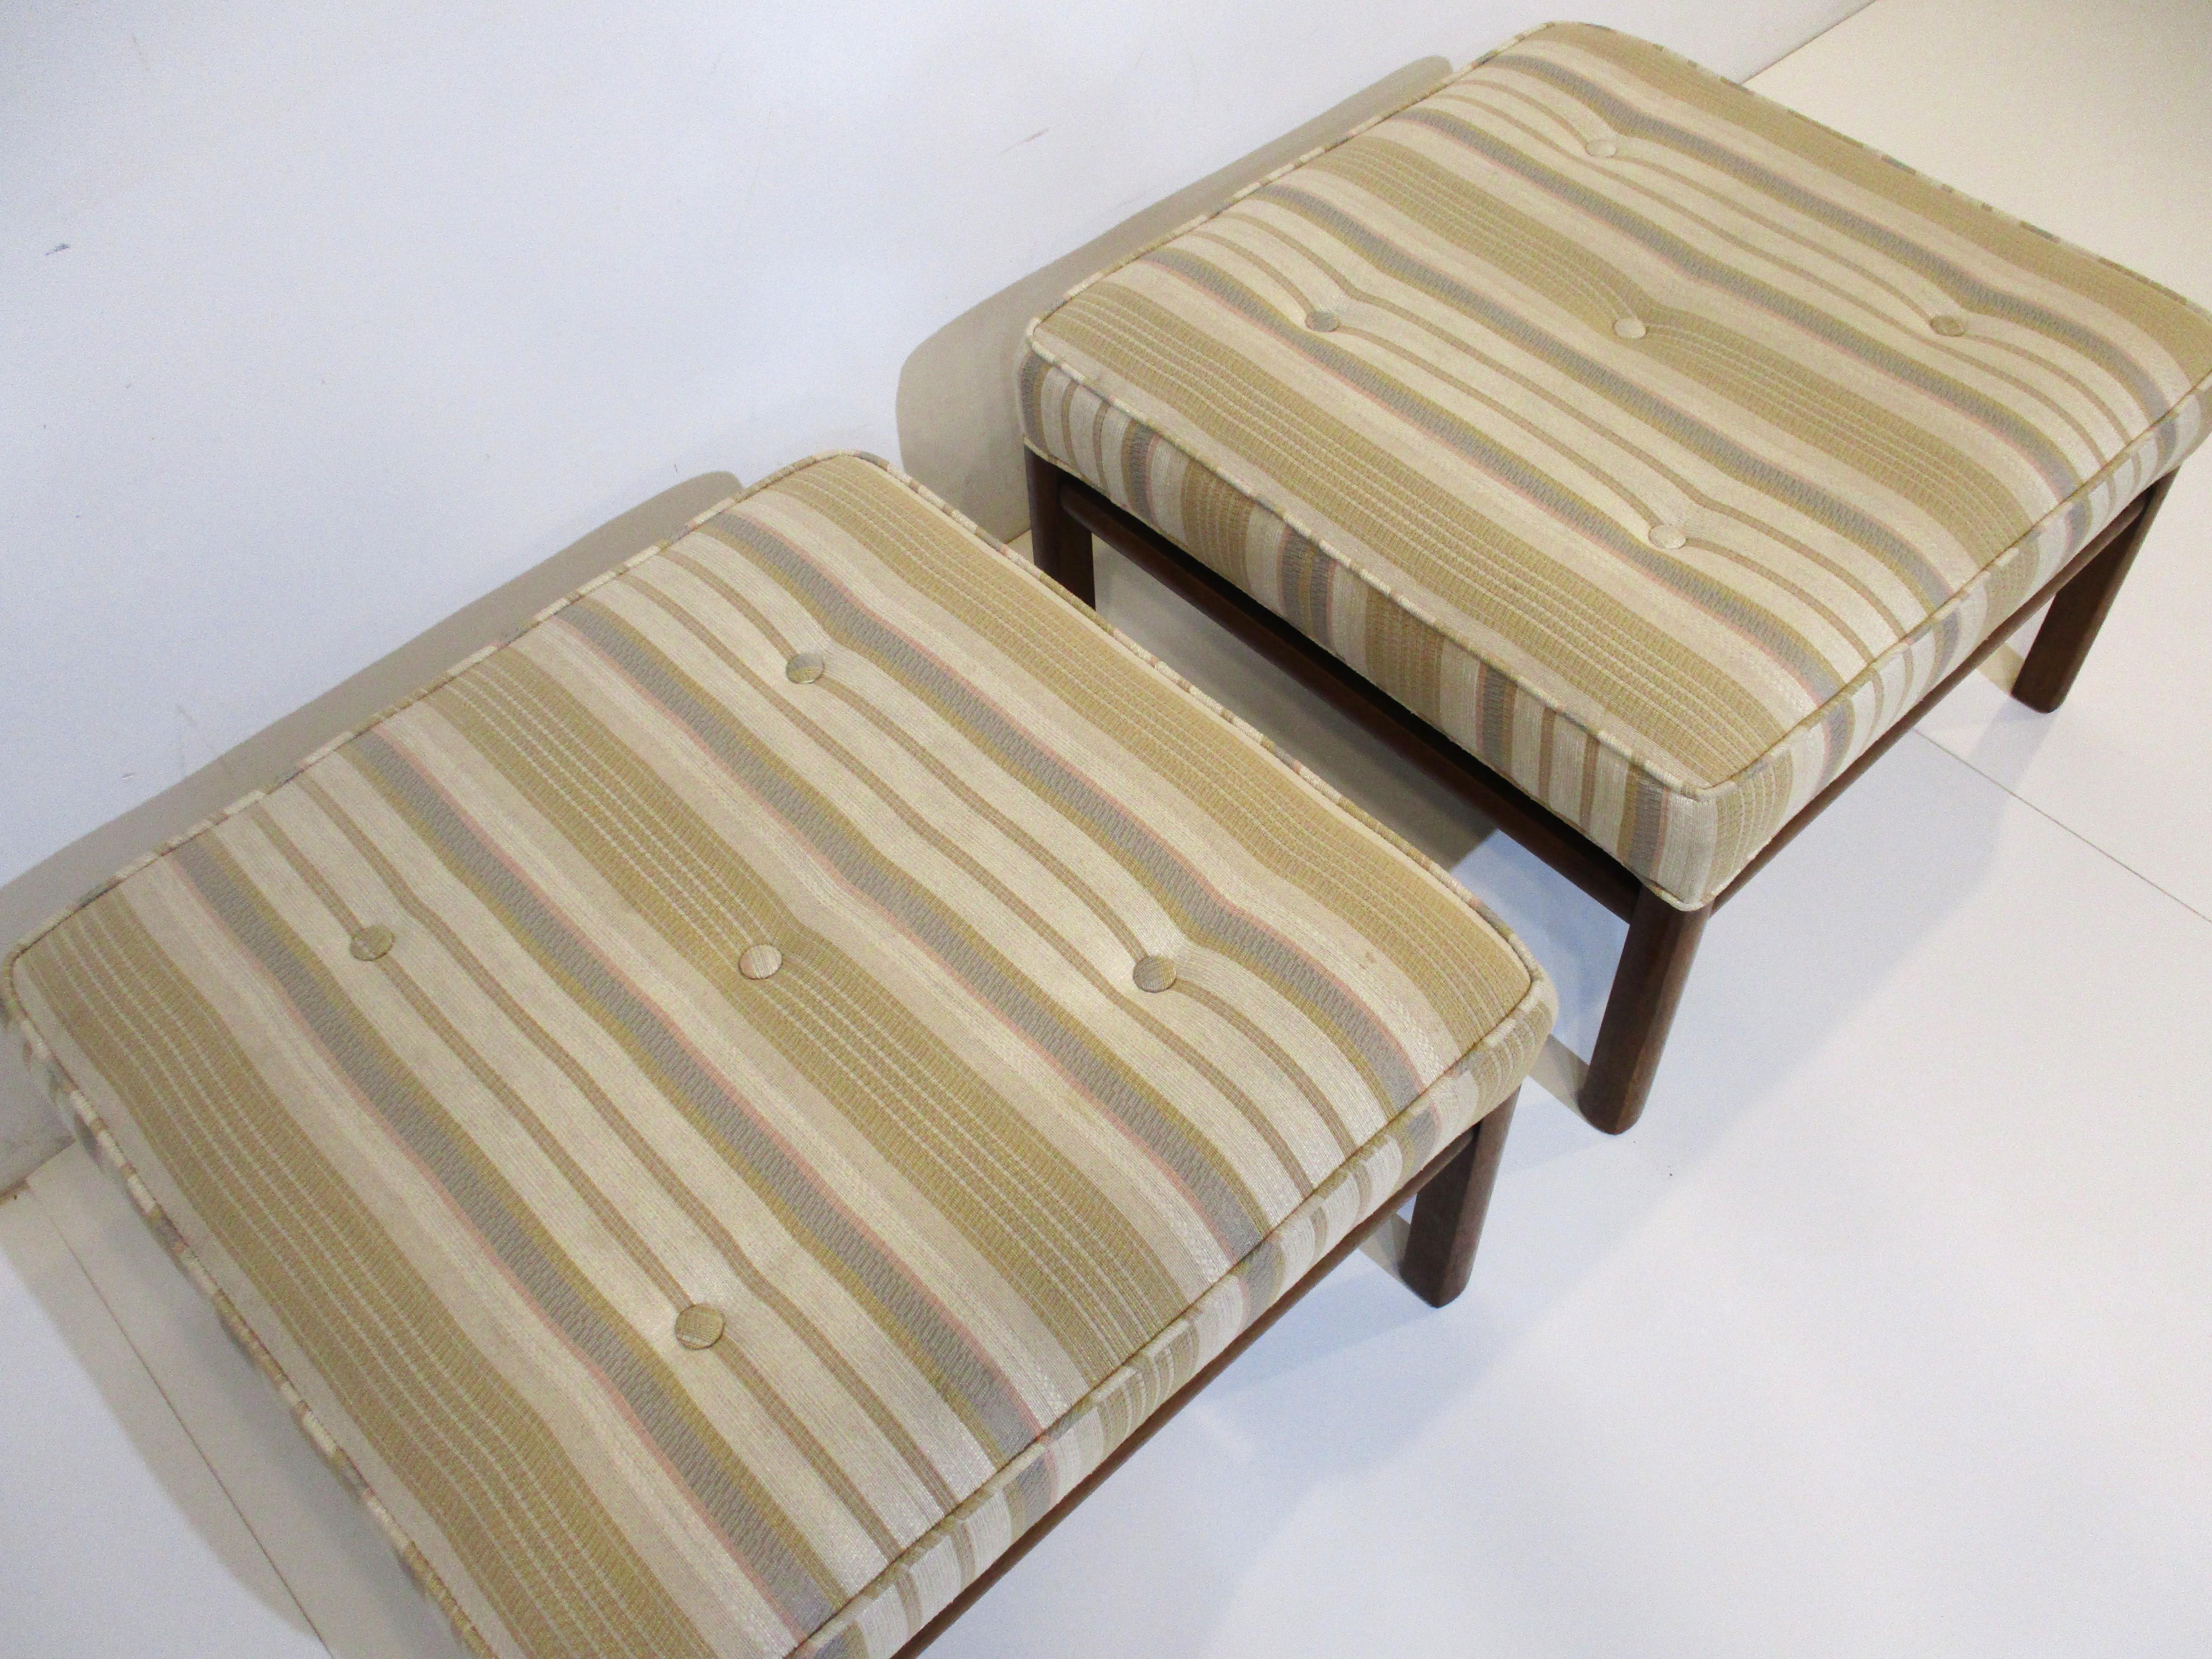 20th Century Upholstered Ottomans / Stools in the Style of Harvery Probber